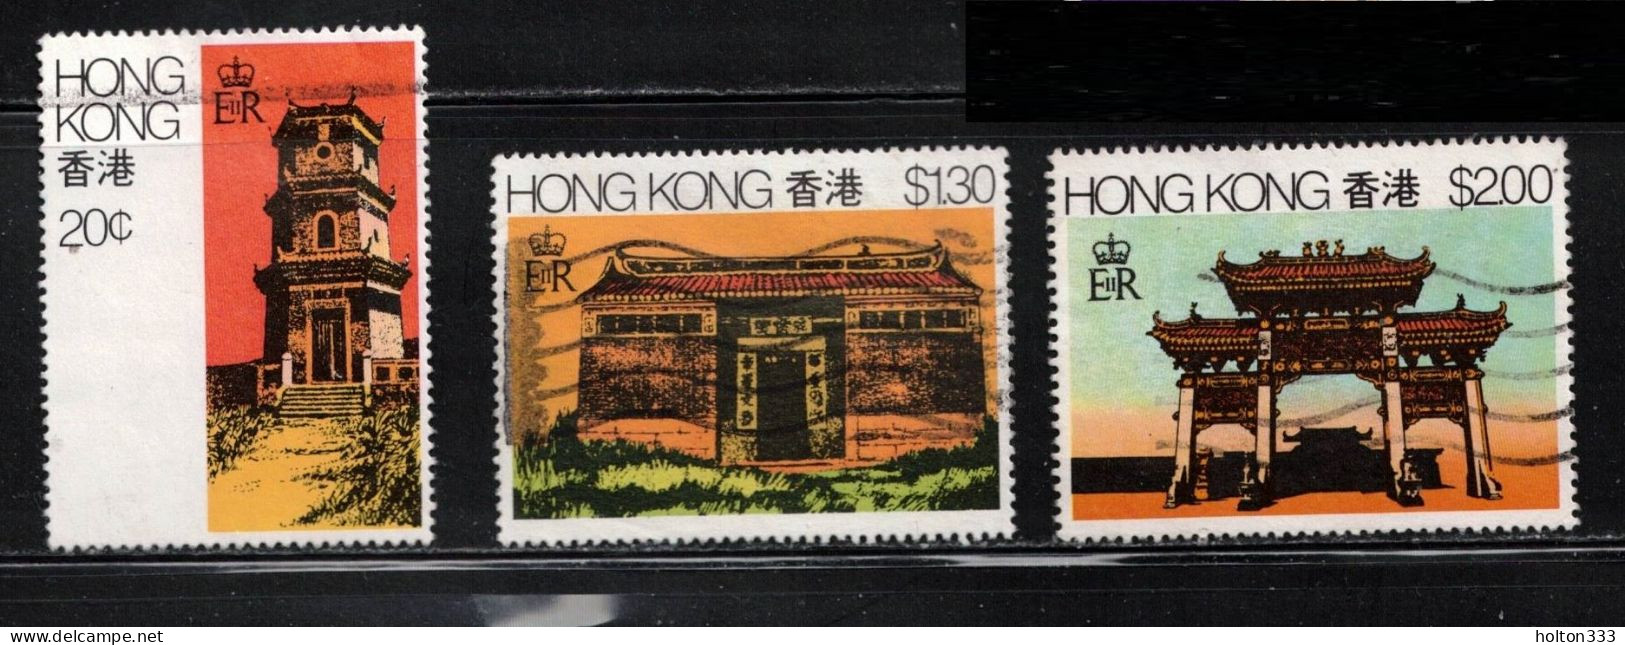 HONG KONG Scott # 361-3 Used - Old Buildings - Used Stamps